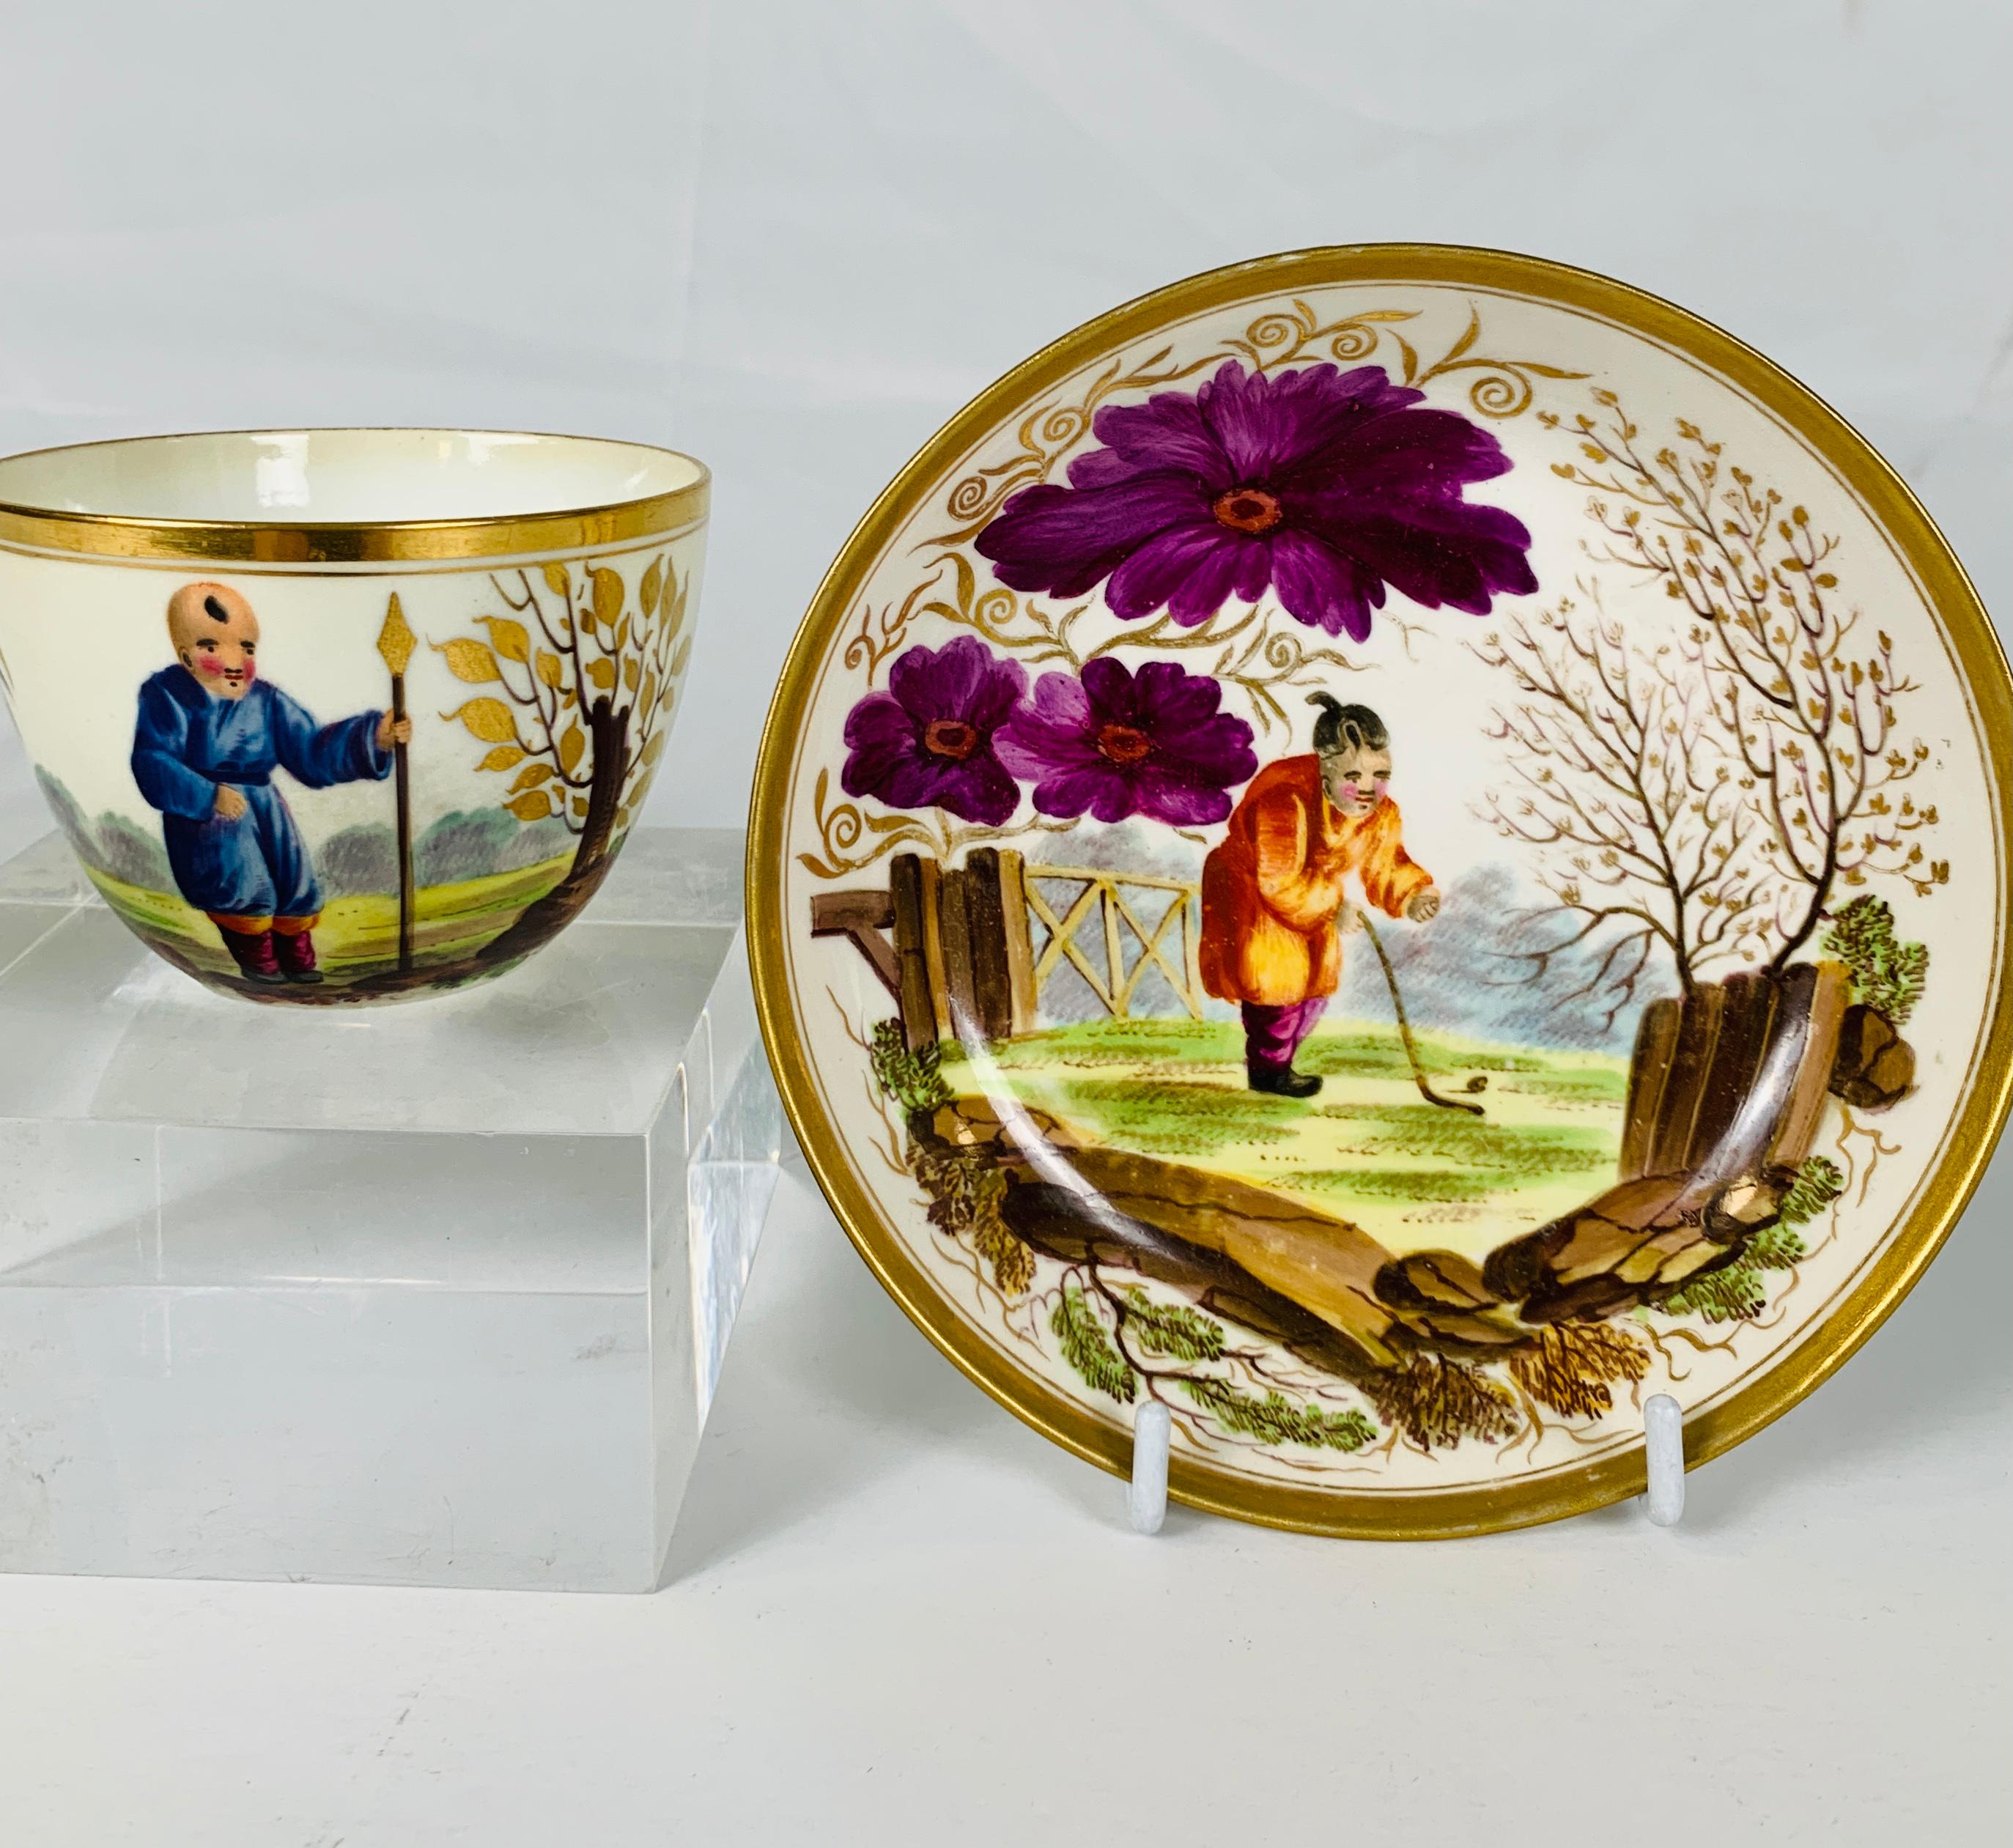 Provenance: The Private Collection of Mario Buatta
Mario loved to have something special, especially if it had beautiful and unexpected color combinations. 
This Minton cup and saucer have both. Made in England circa 1820, the cup and saucer each